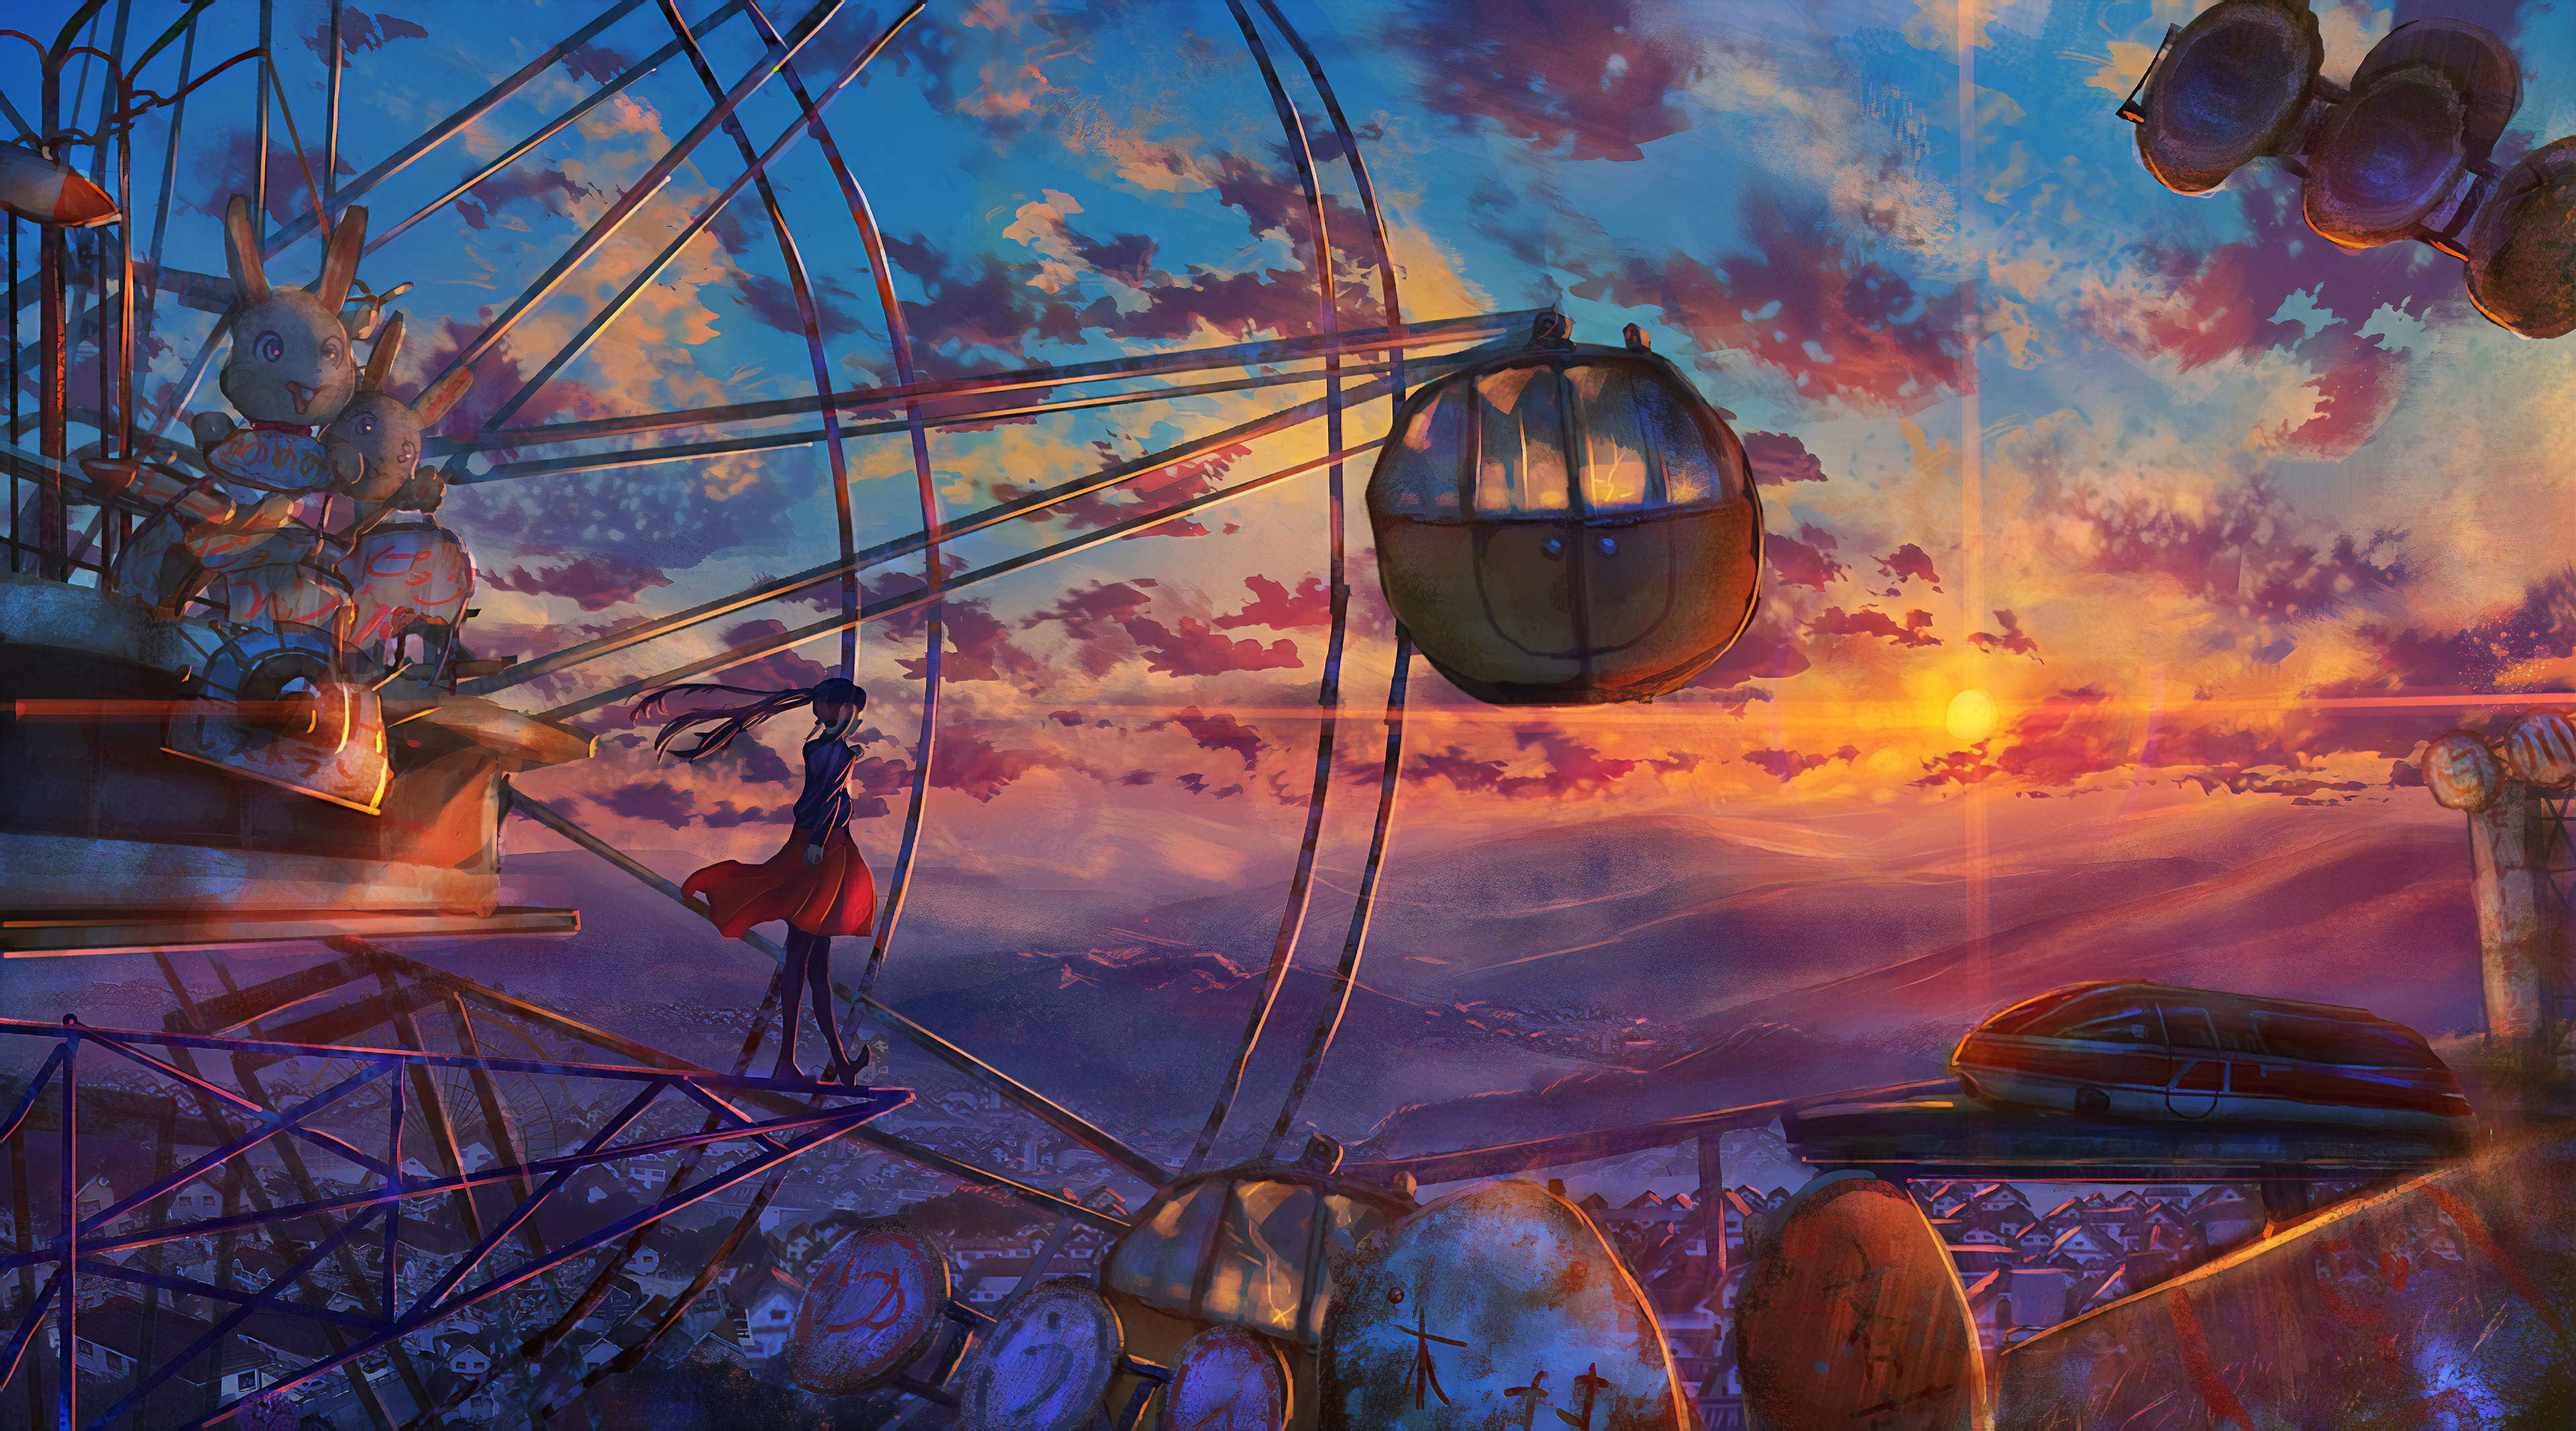 Anime Ferris Wheel Painting, HD Anime, 4k Wallpapers, Images